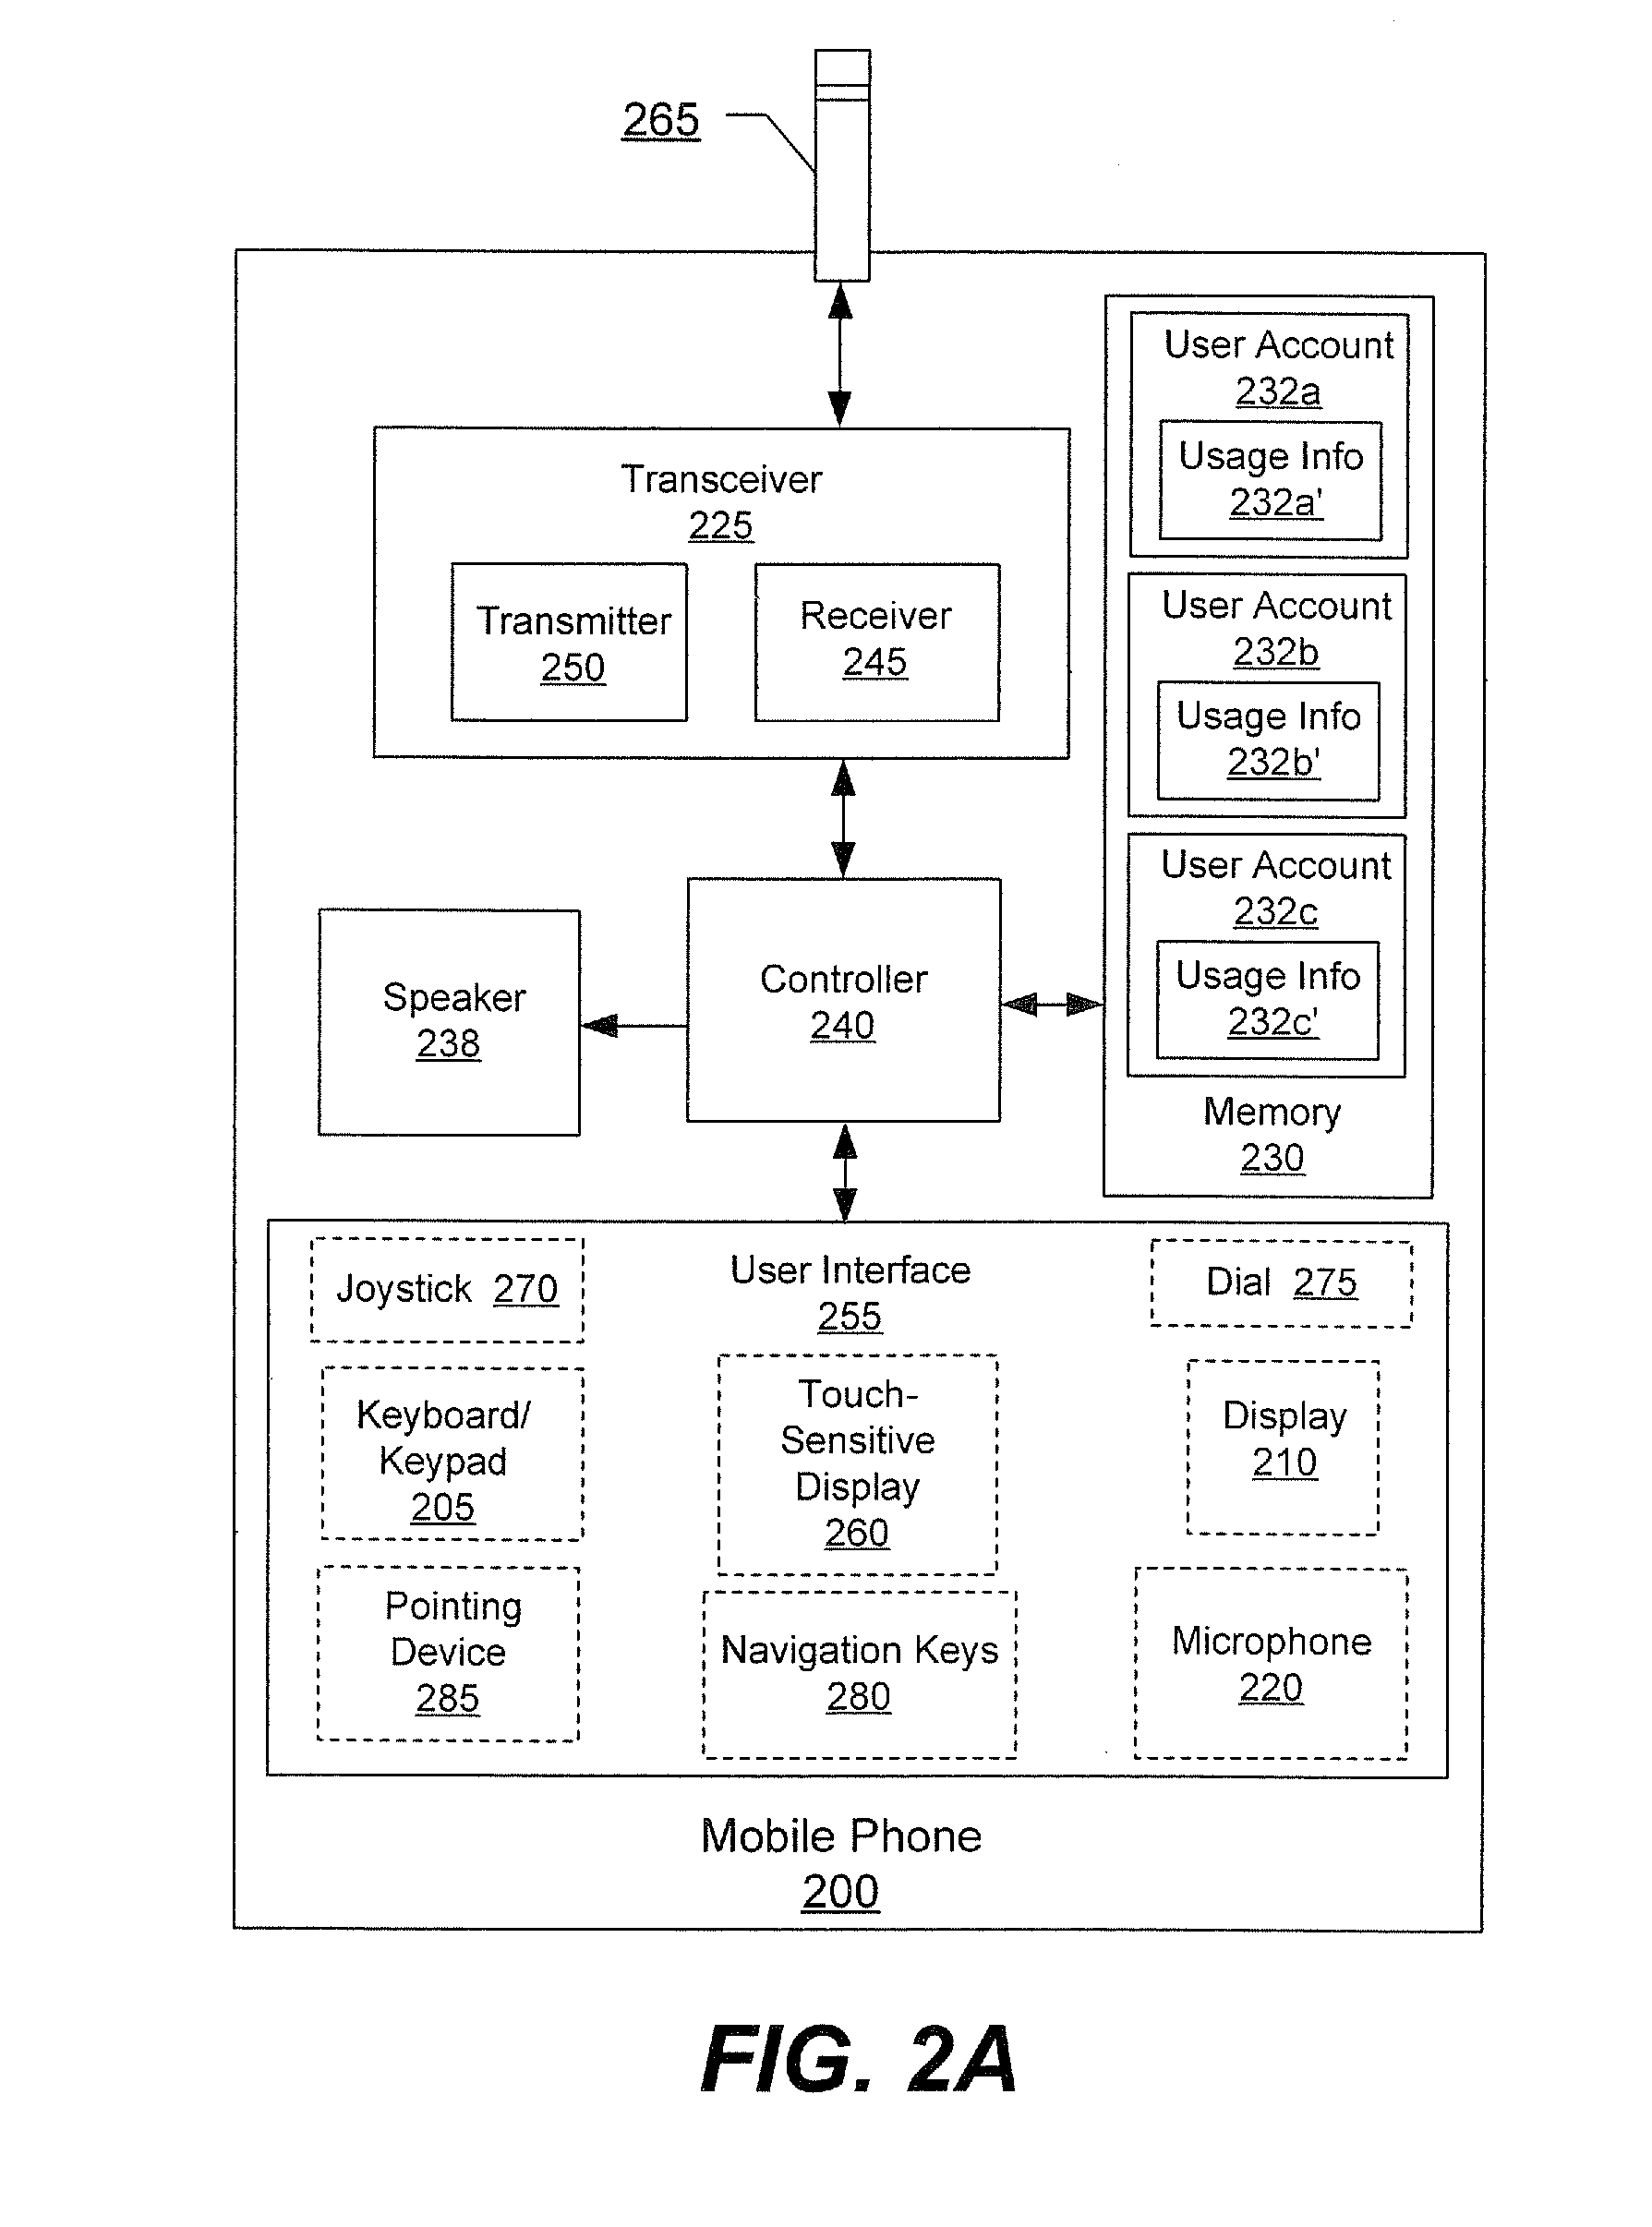 Methods, devices and computer program products for tracking usage of a network by a plurality of users of a mobile phone